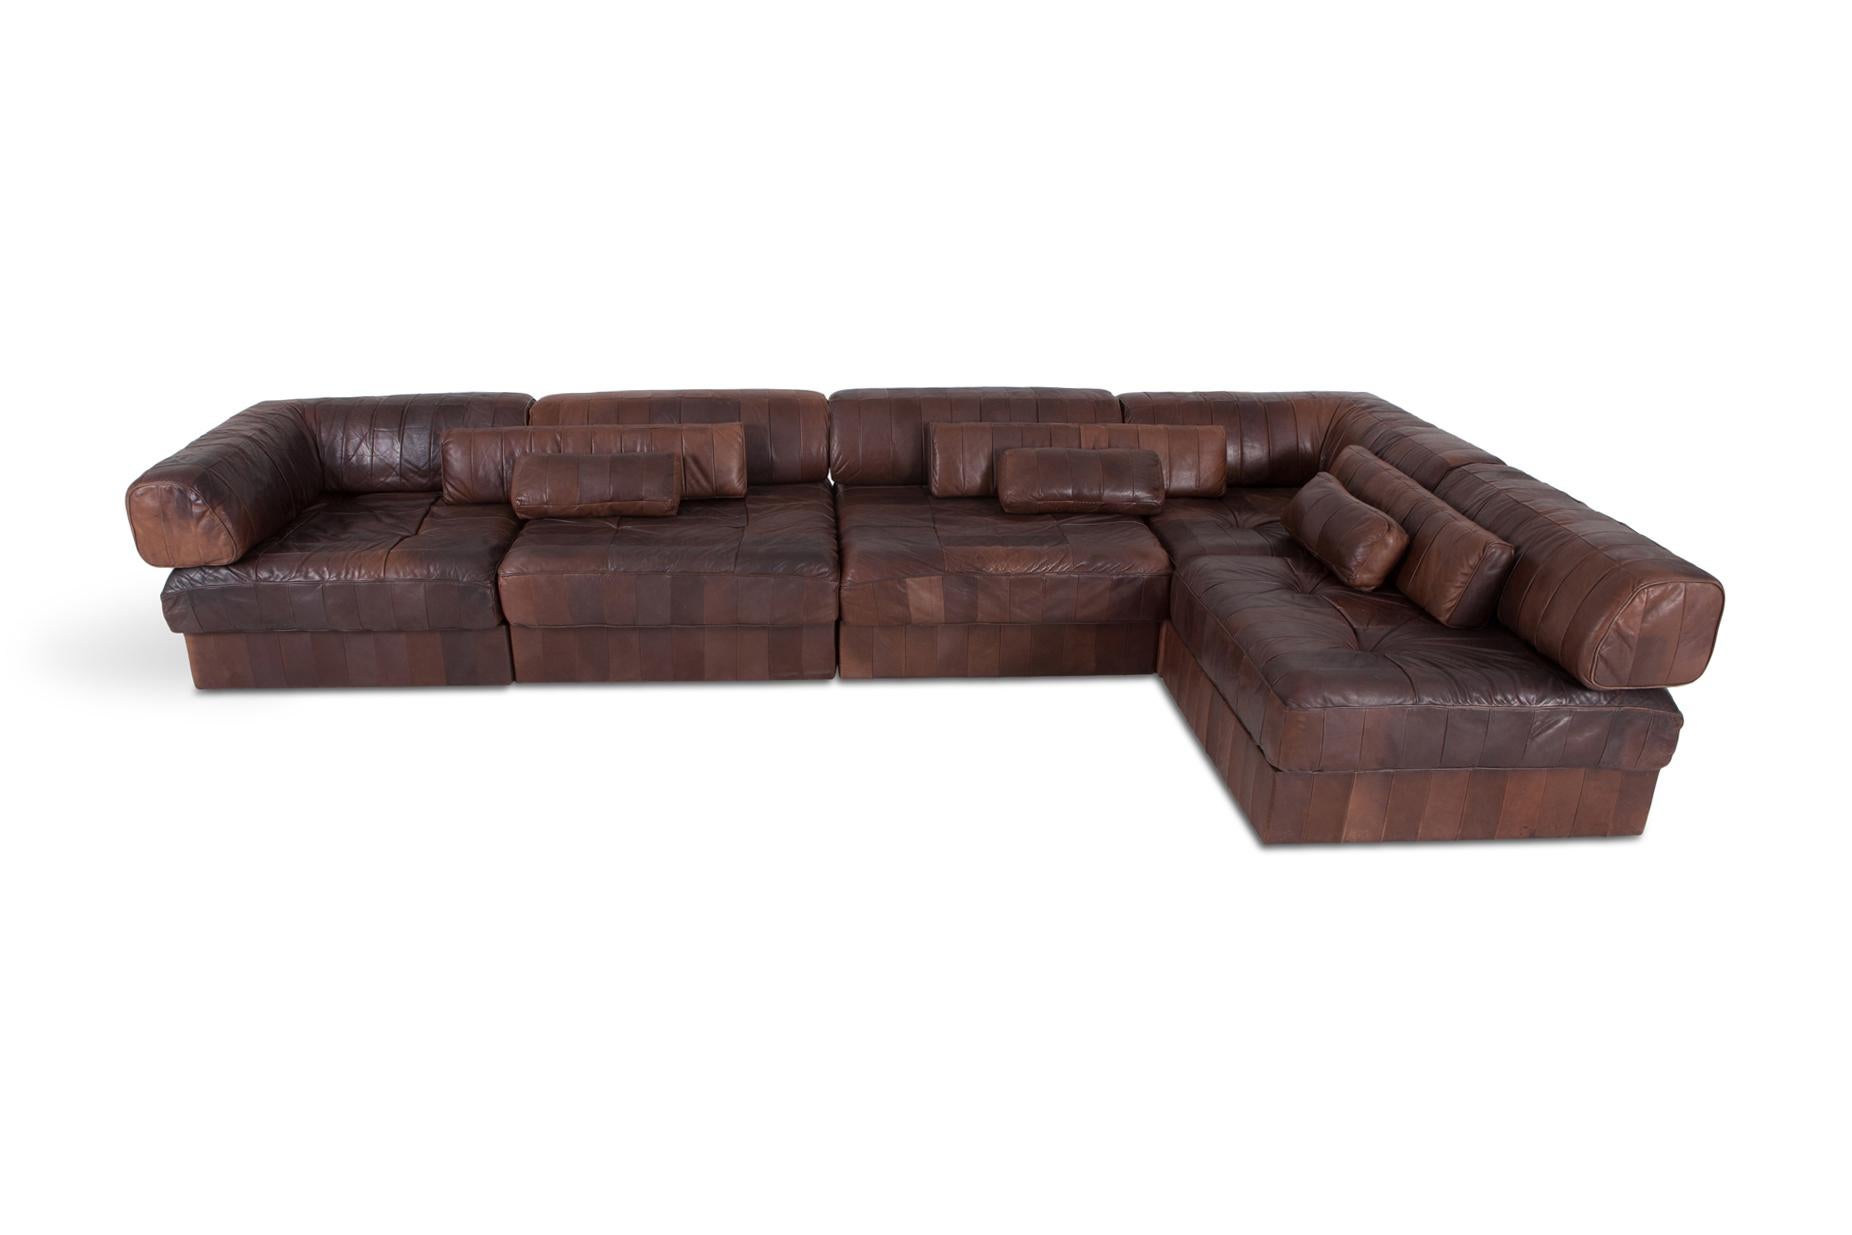 DS 88 sectional sofa in patchwork brown-cognac leather. 

Hand built in the 1970s to incredibly high standards by De Sede craftsman in Switzerland.   Made of five sections, each with a base leather patchwork cushion and a back cushion made from the